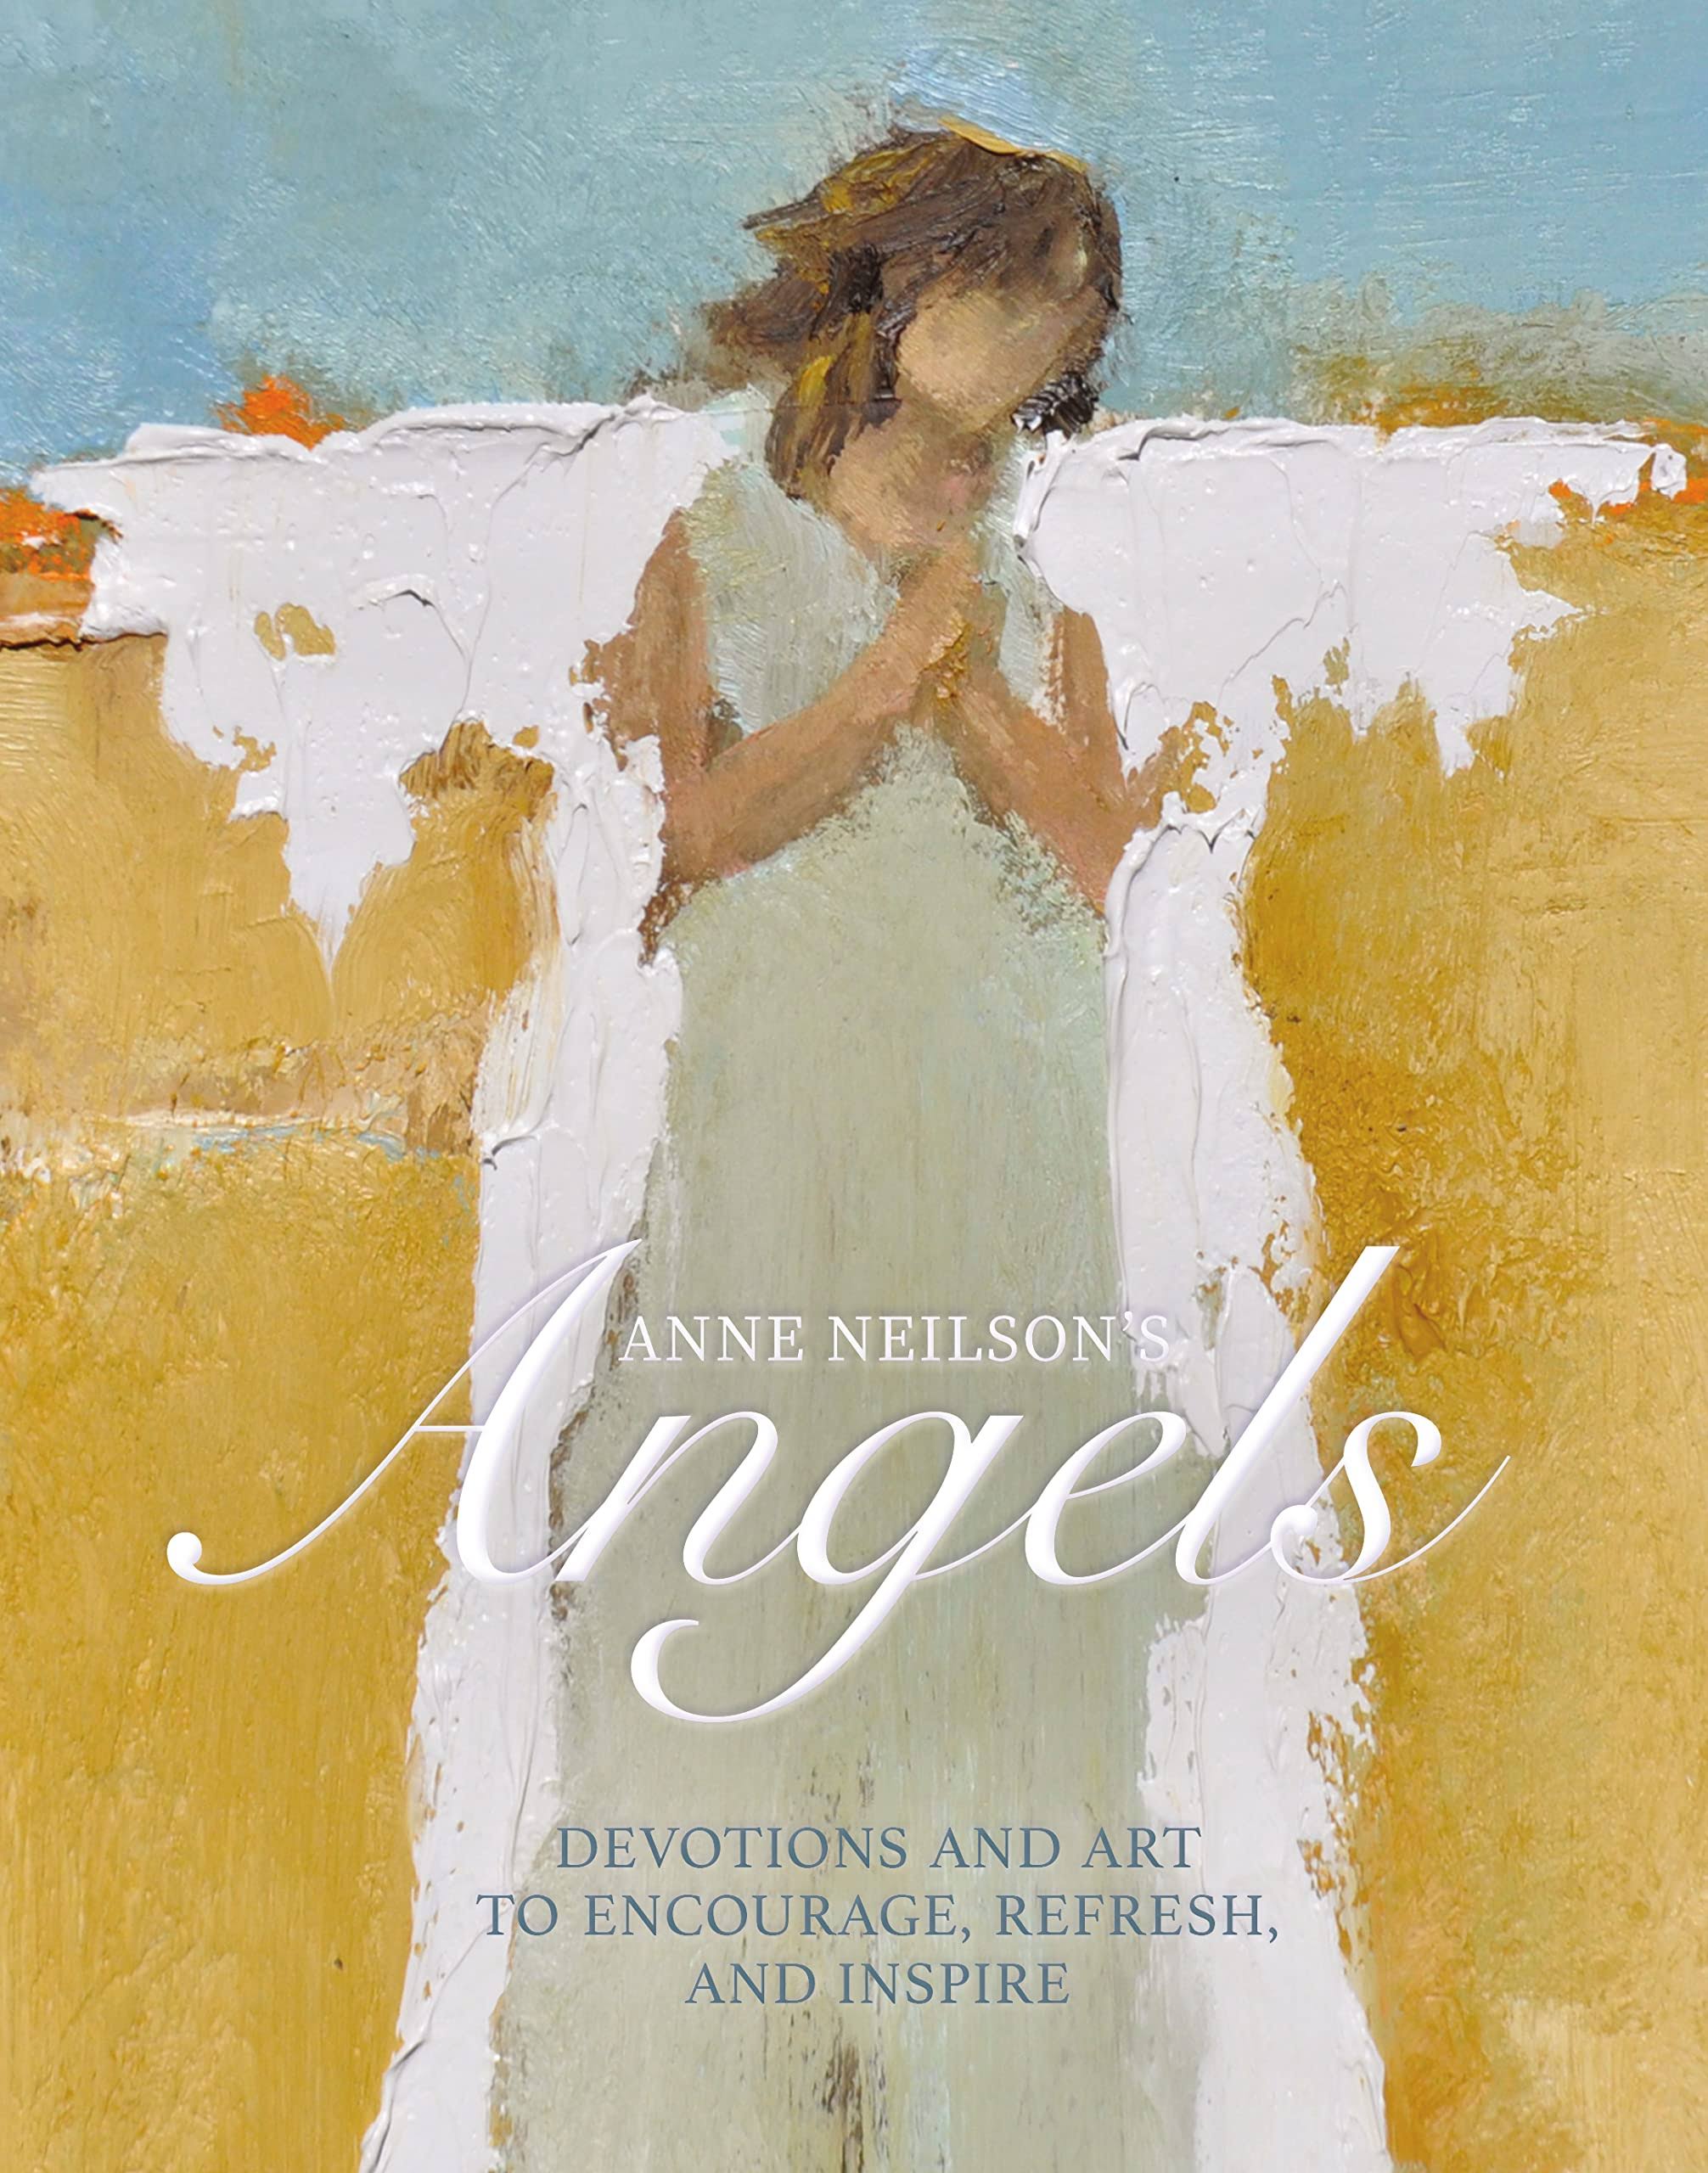 Anne Neilson's Angels: Devotions and Art to Encourage, Refresh, and Inspire [Book]